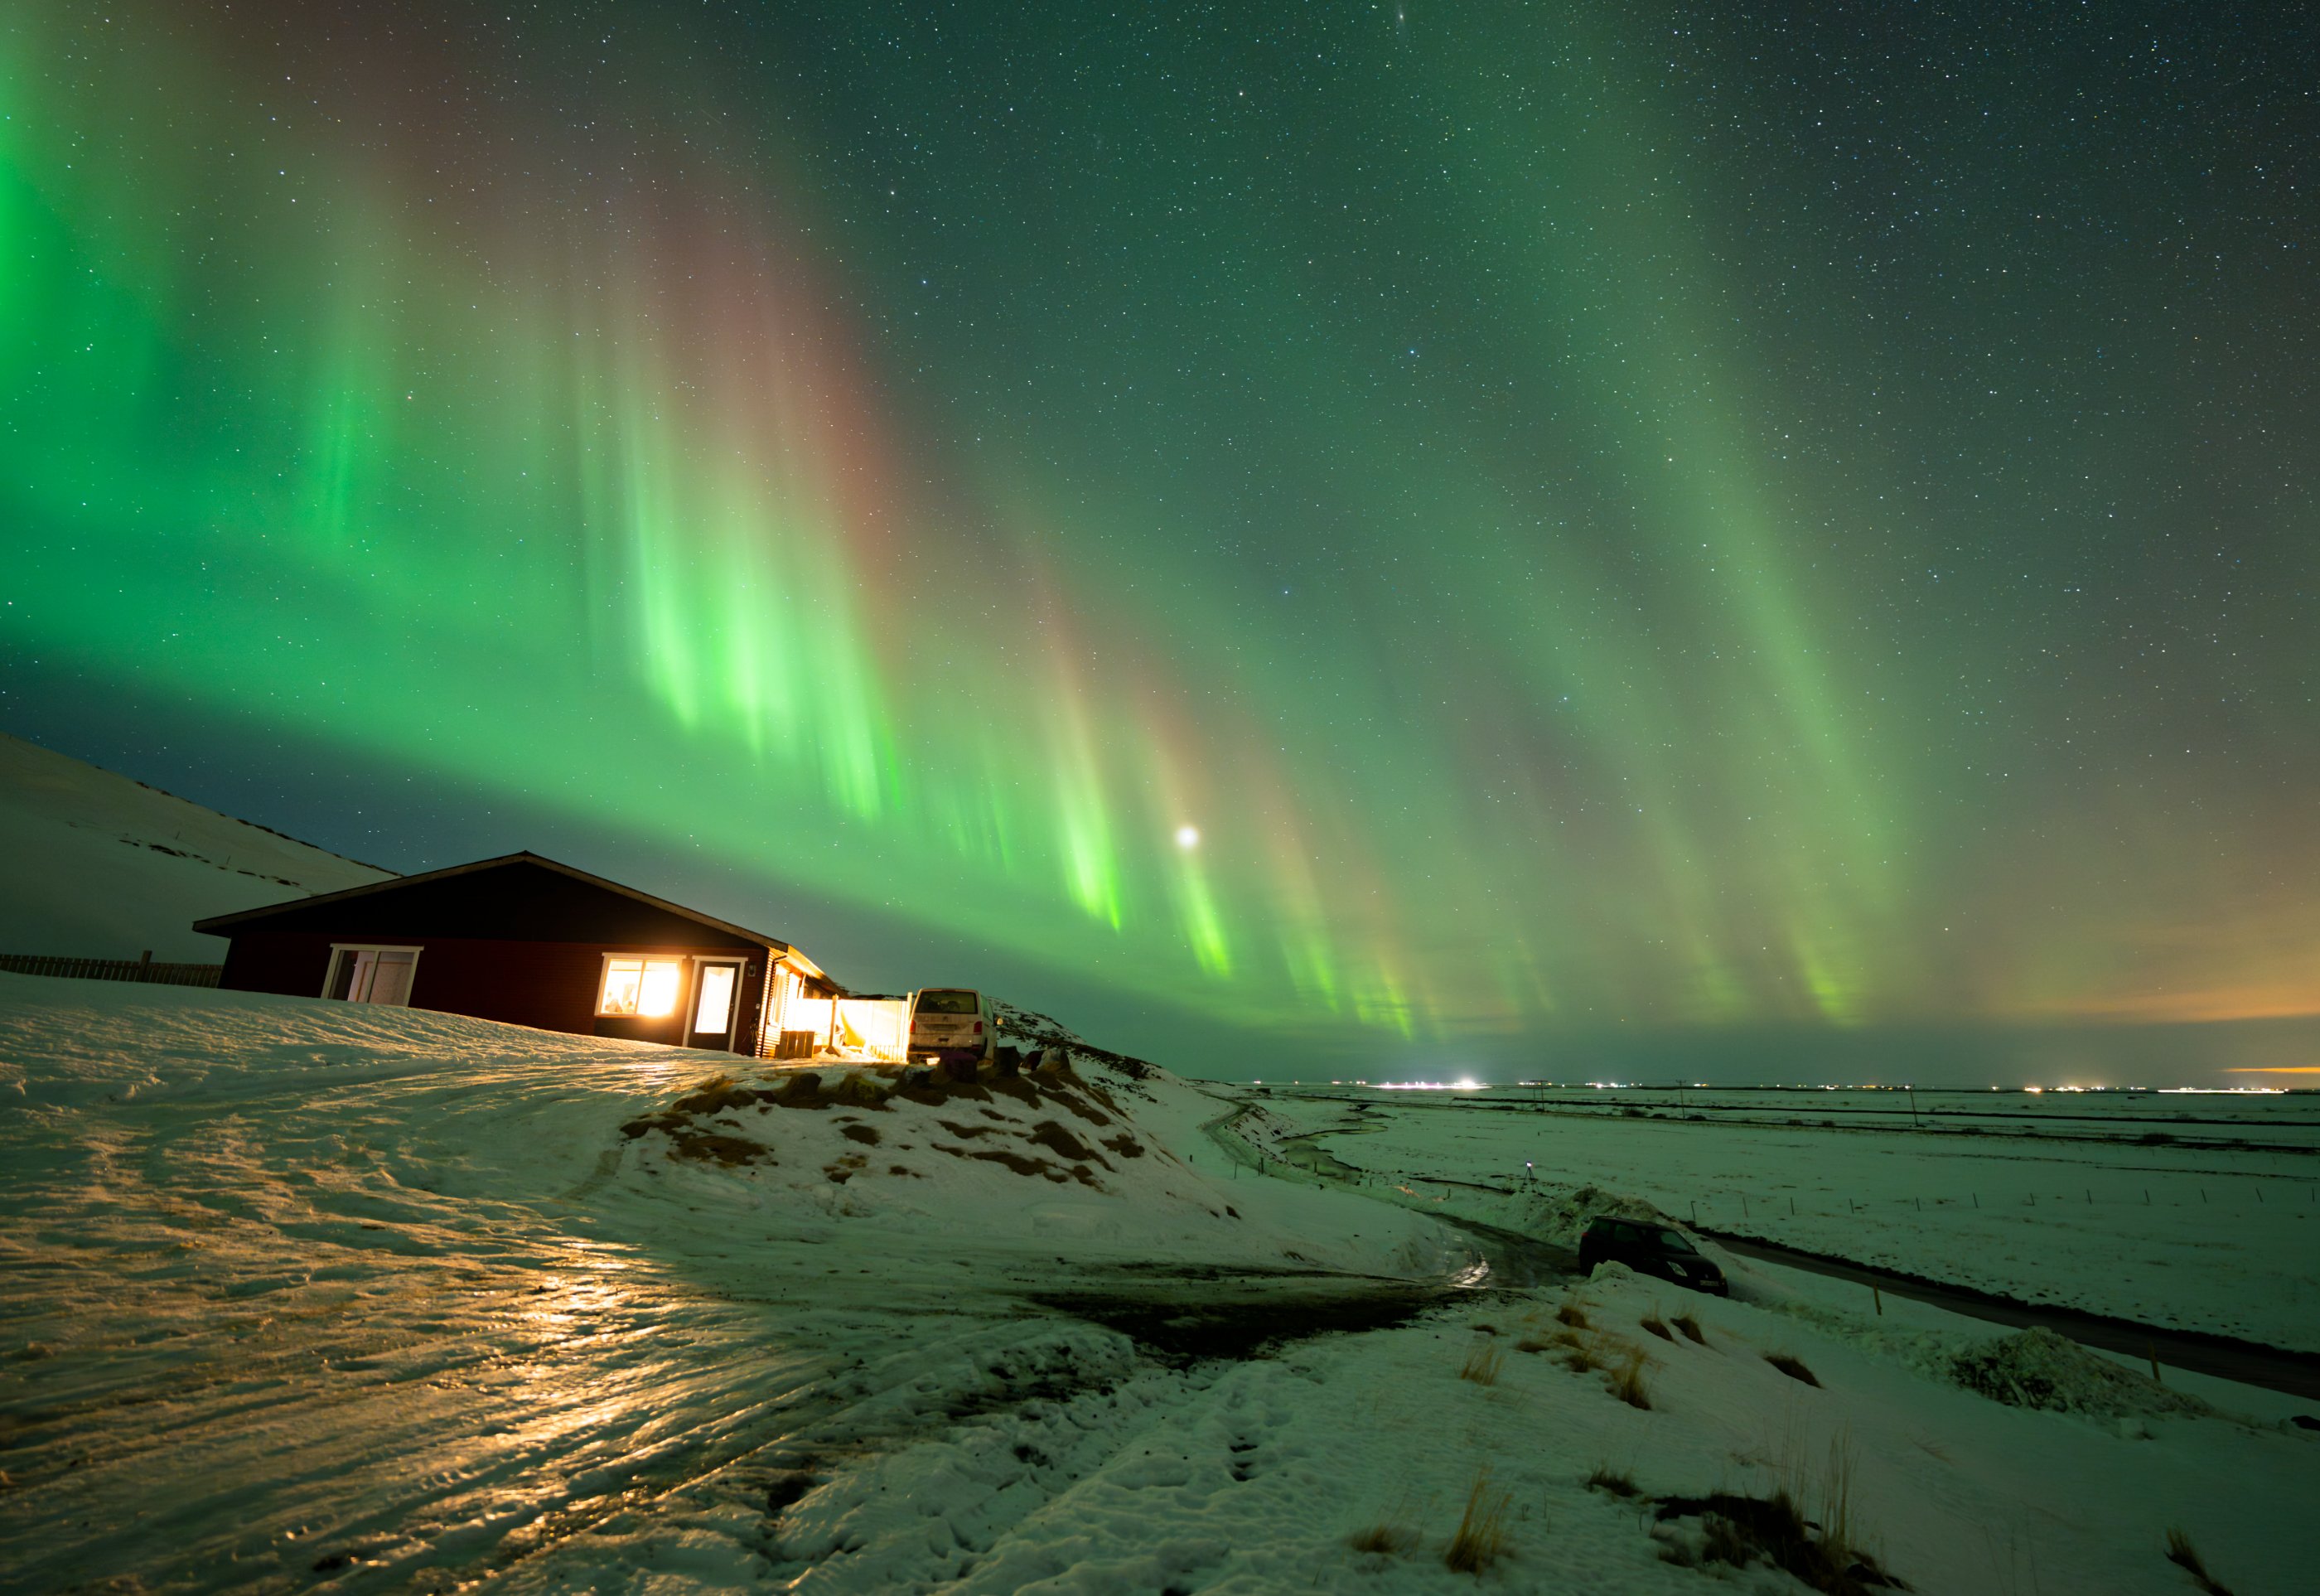 the aurora is in the sky over a cabin and a frozen coastal area